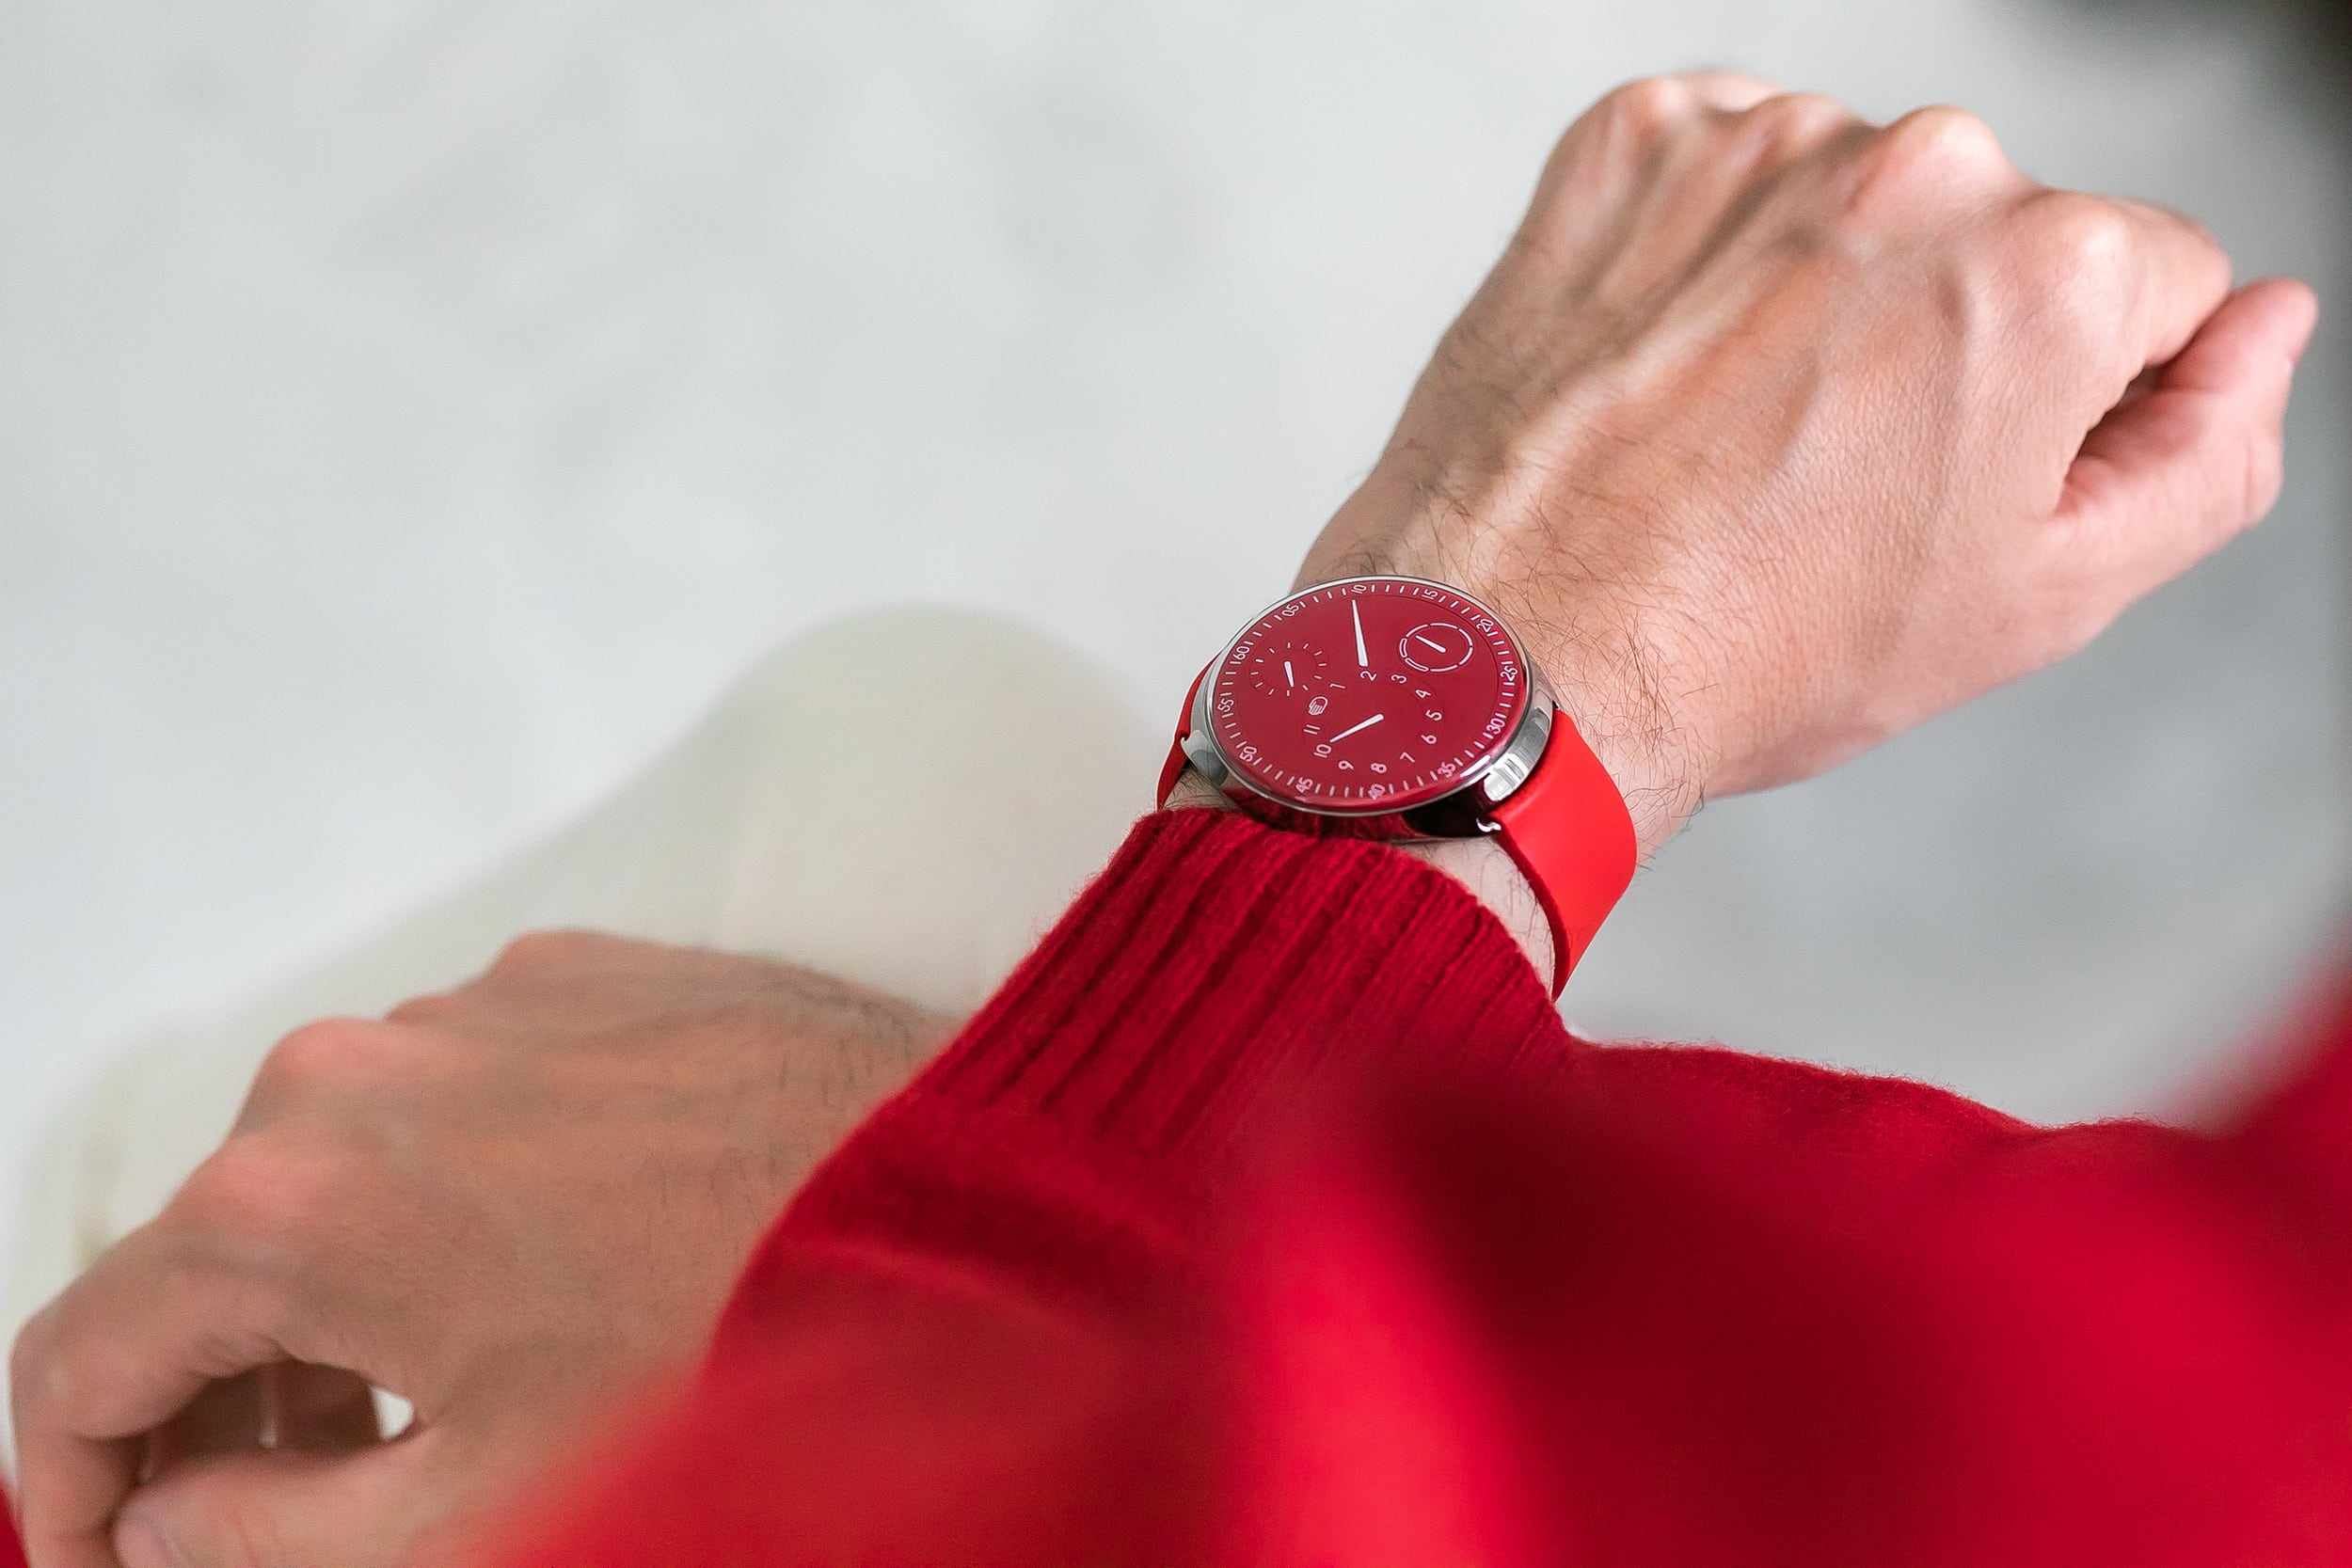 Introducing The Ressence Type 1 Slim Red